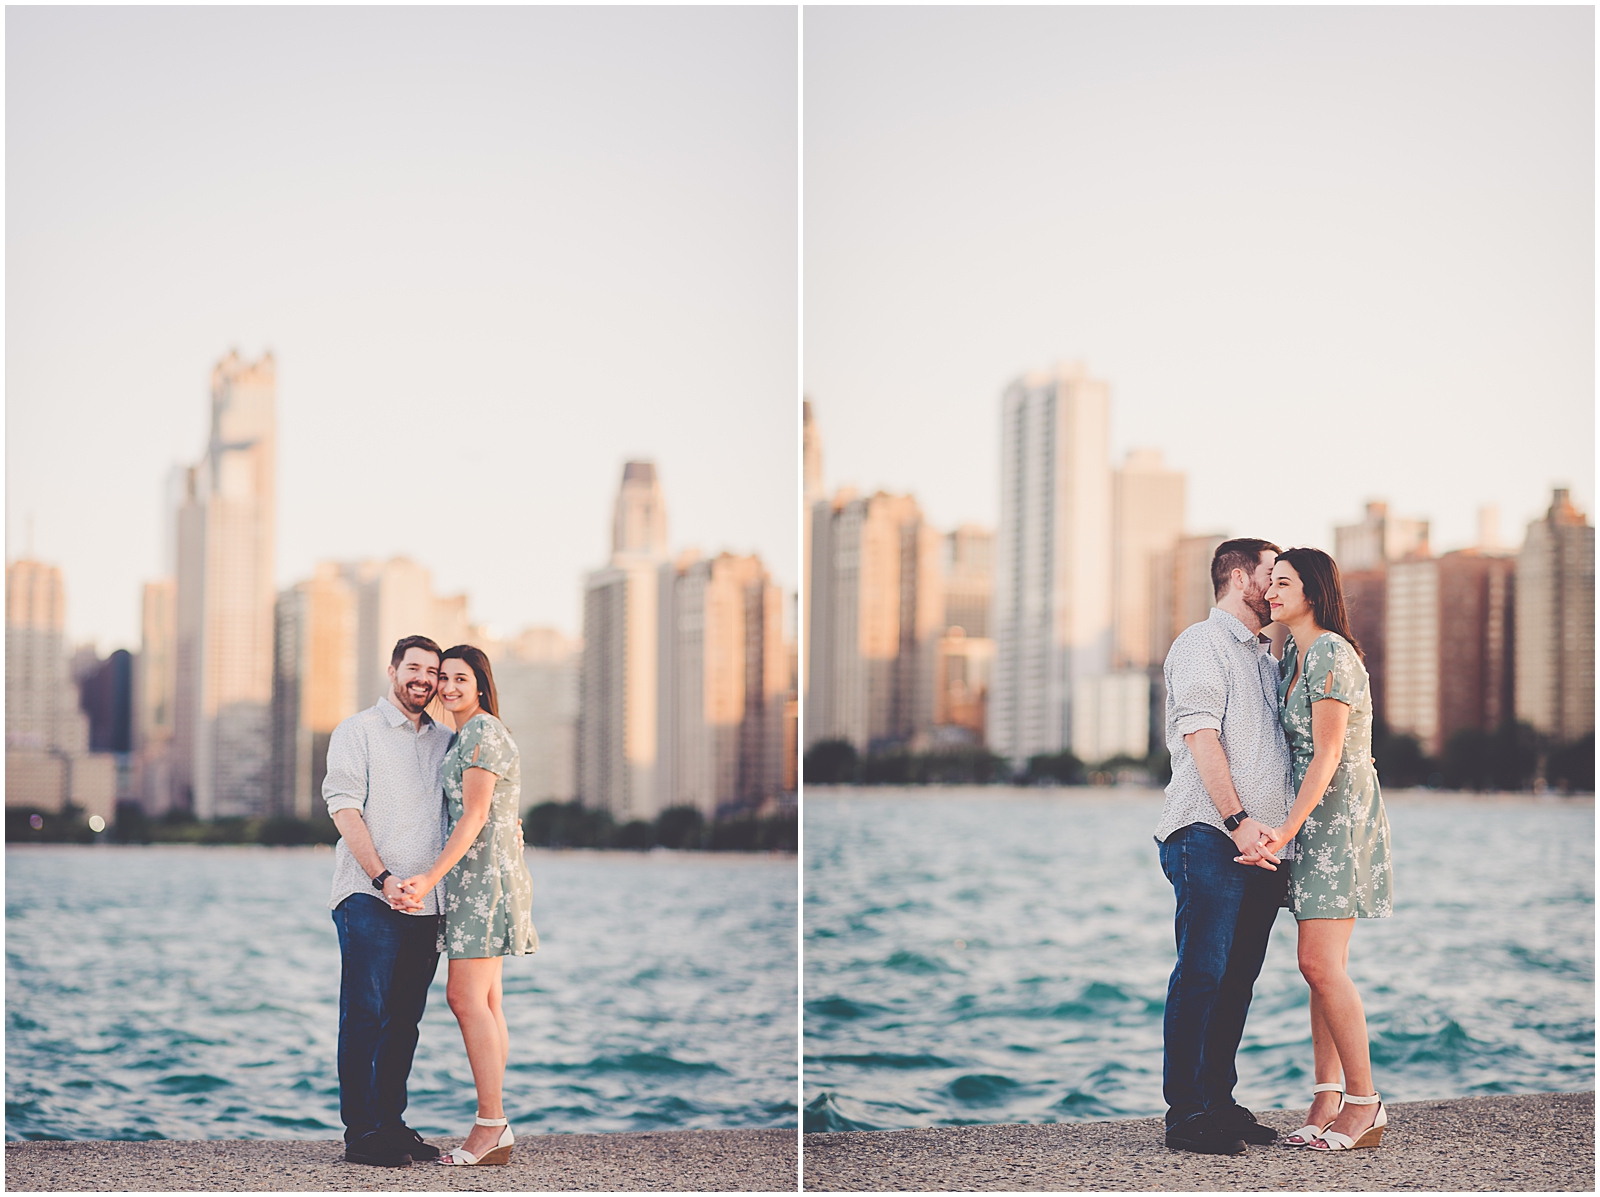 Michelle and Derek's engagement photos at Lincoln Park and the Chicago skyline with Chicagoland wedding photographer Kara Evans Photographer.